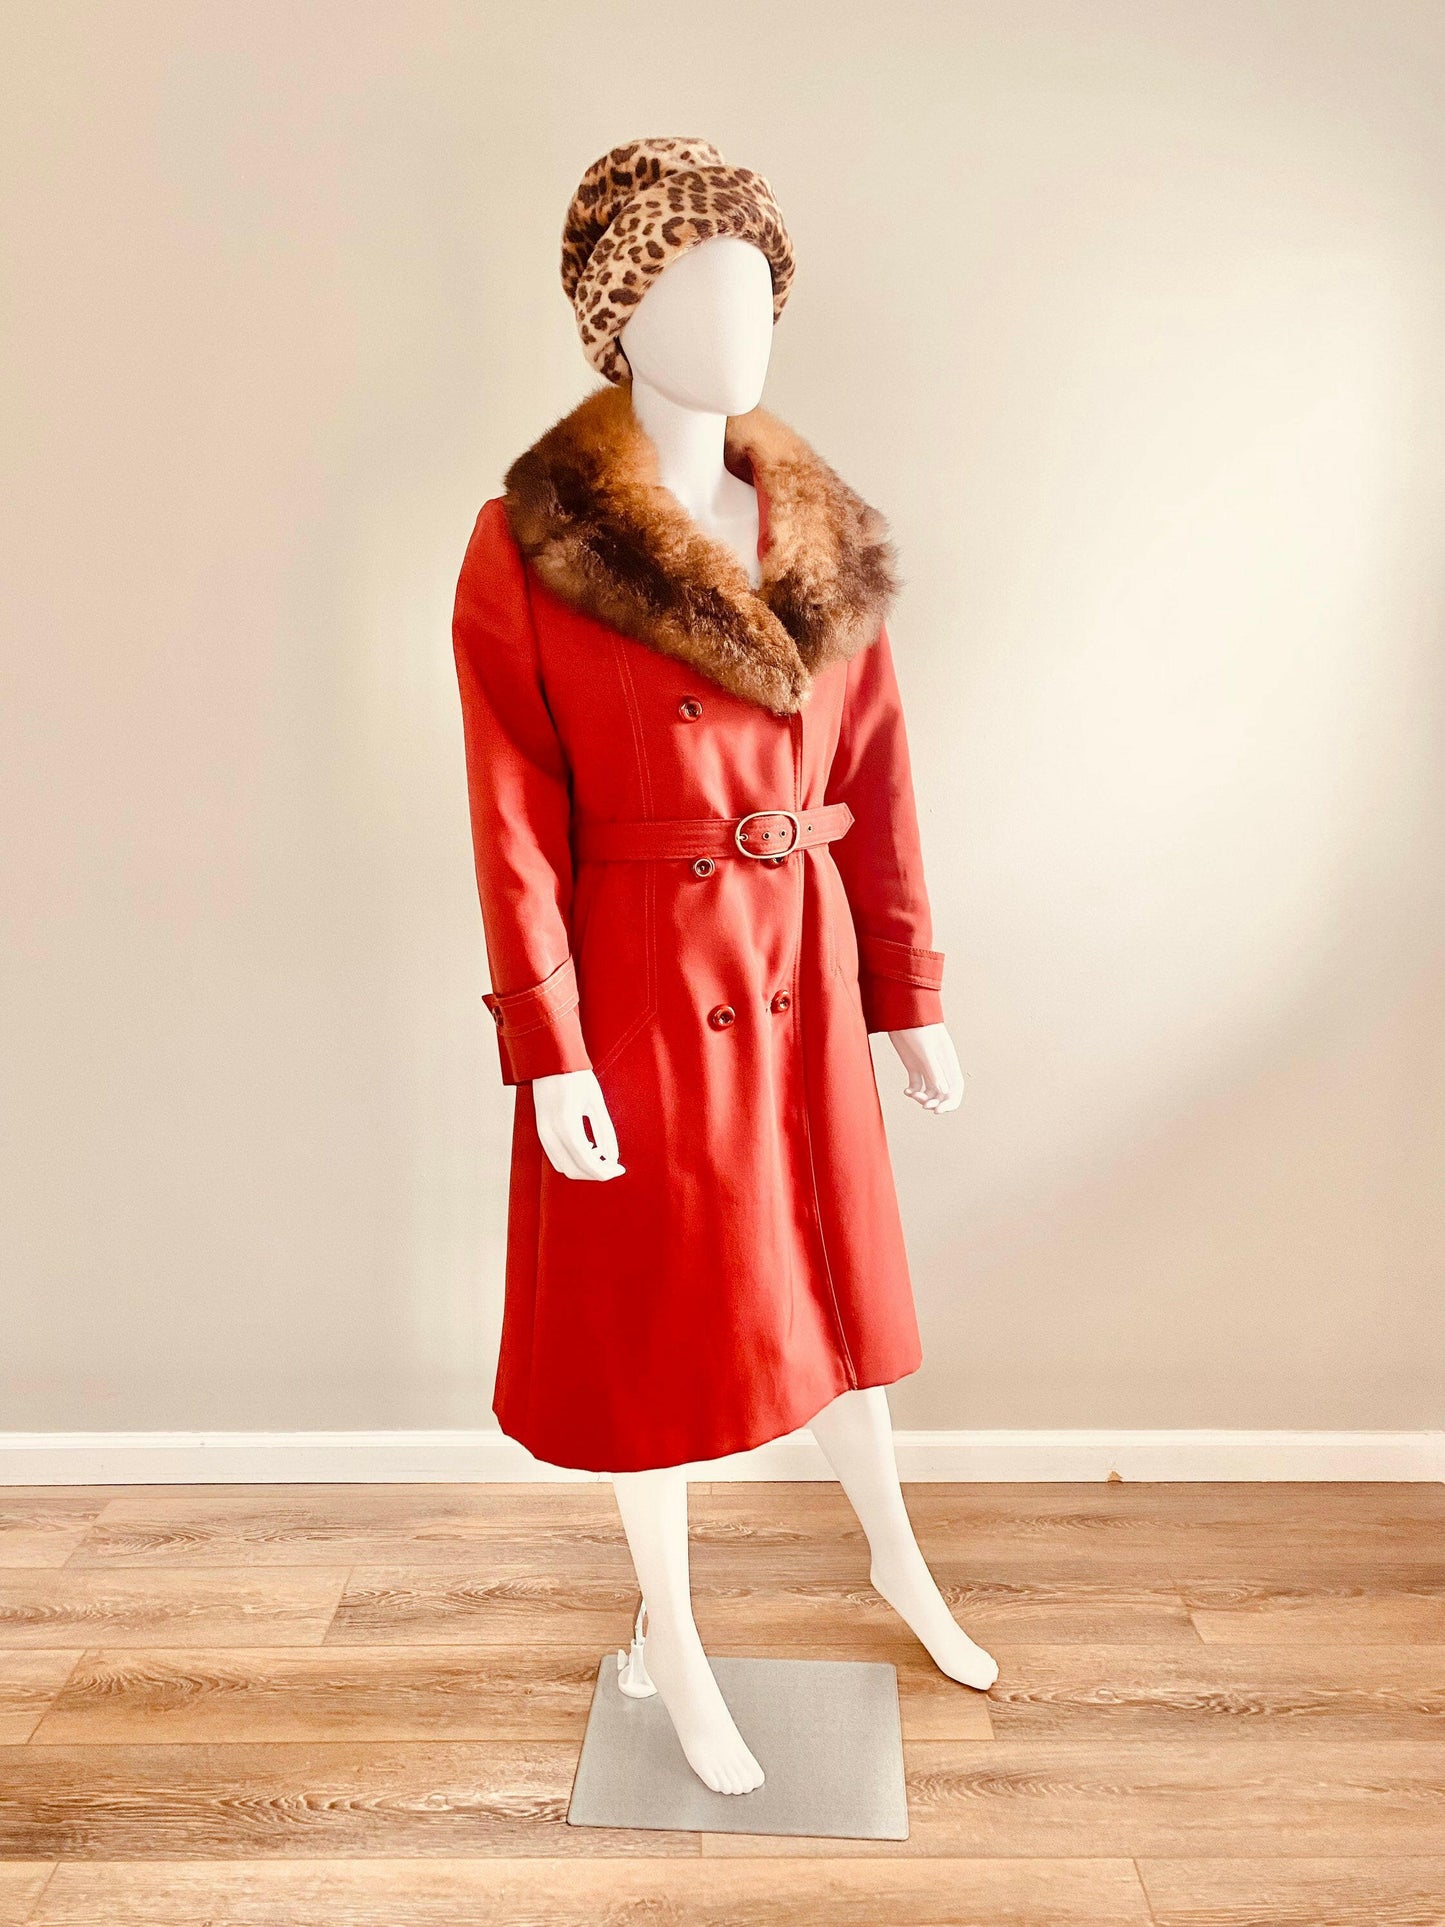 Vintage 1970s Rust Trench Coat with Fur Trim / 70s winter jacket Size S